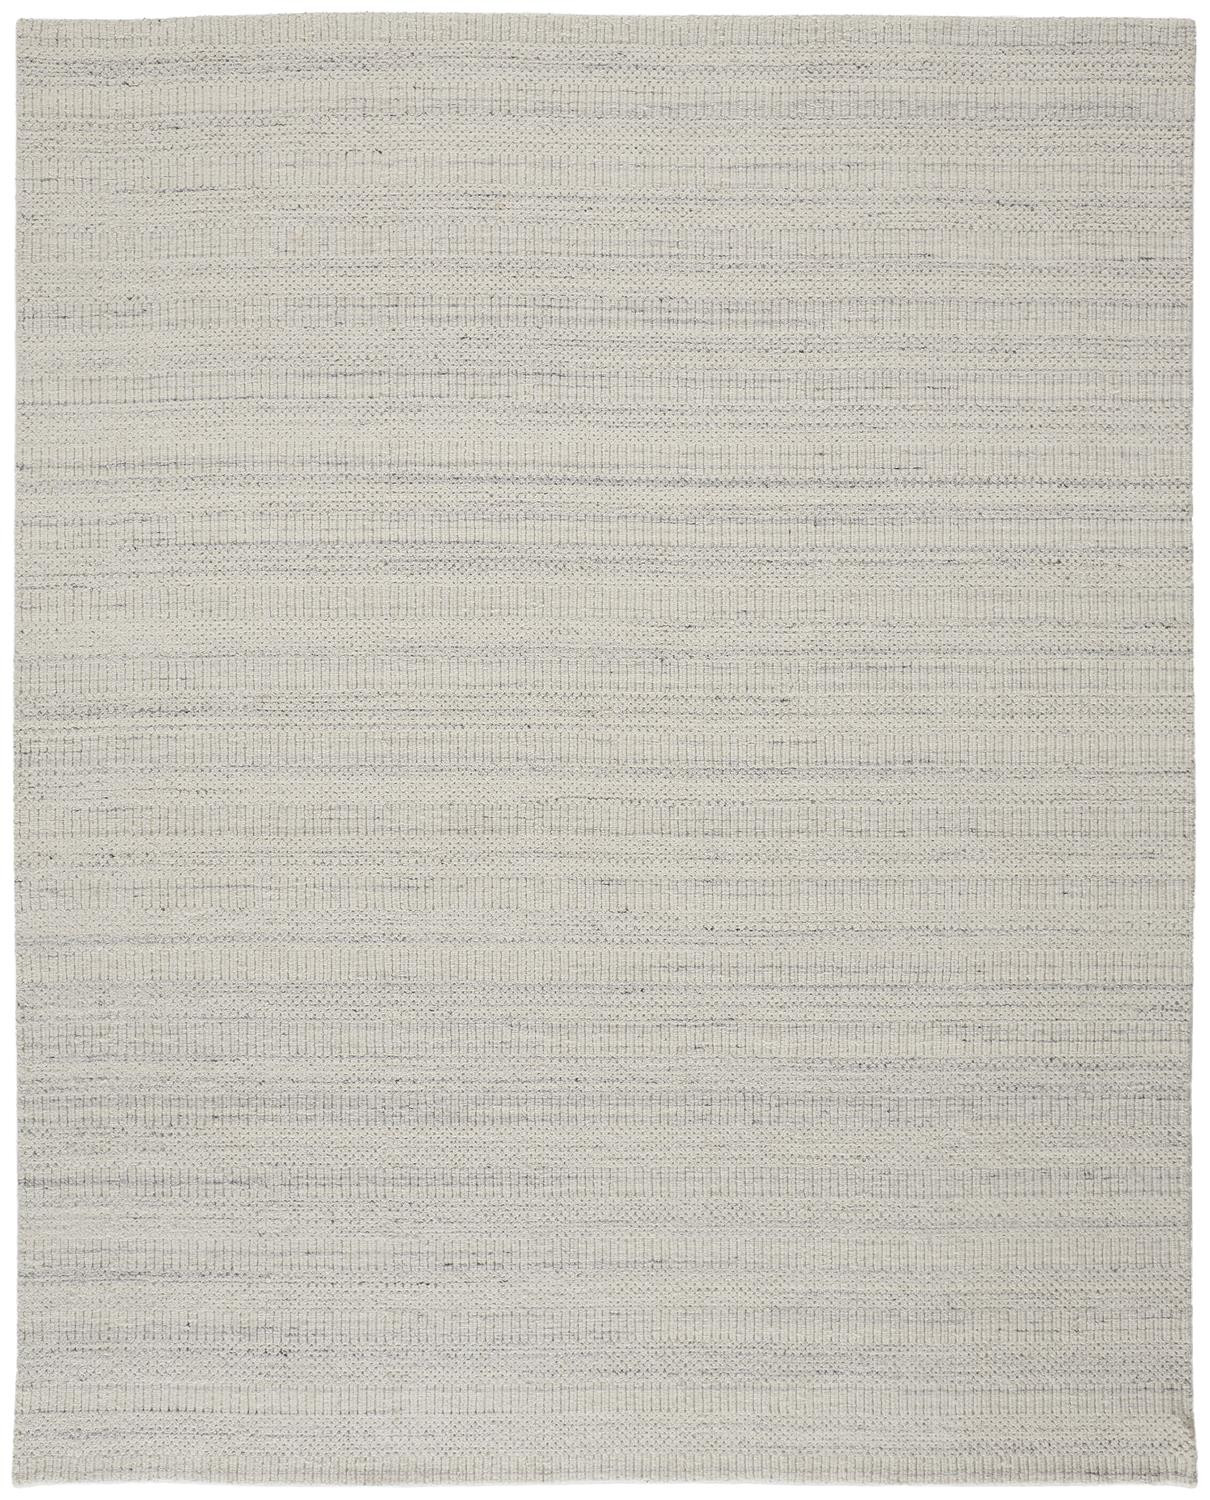 8' X 10' Ivory And Gray Wool Hand Woven Stain Resistant Area Rug-514058-1